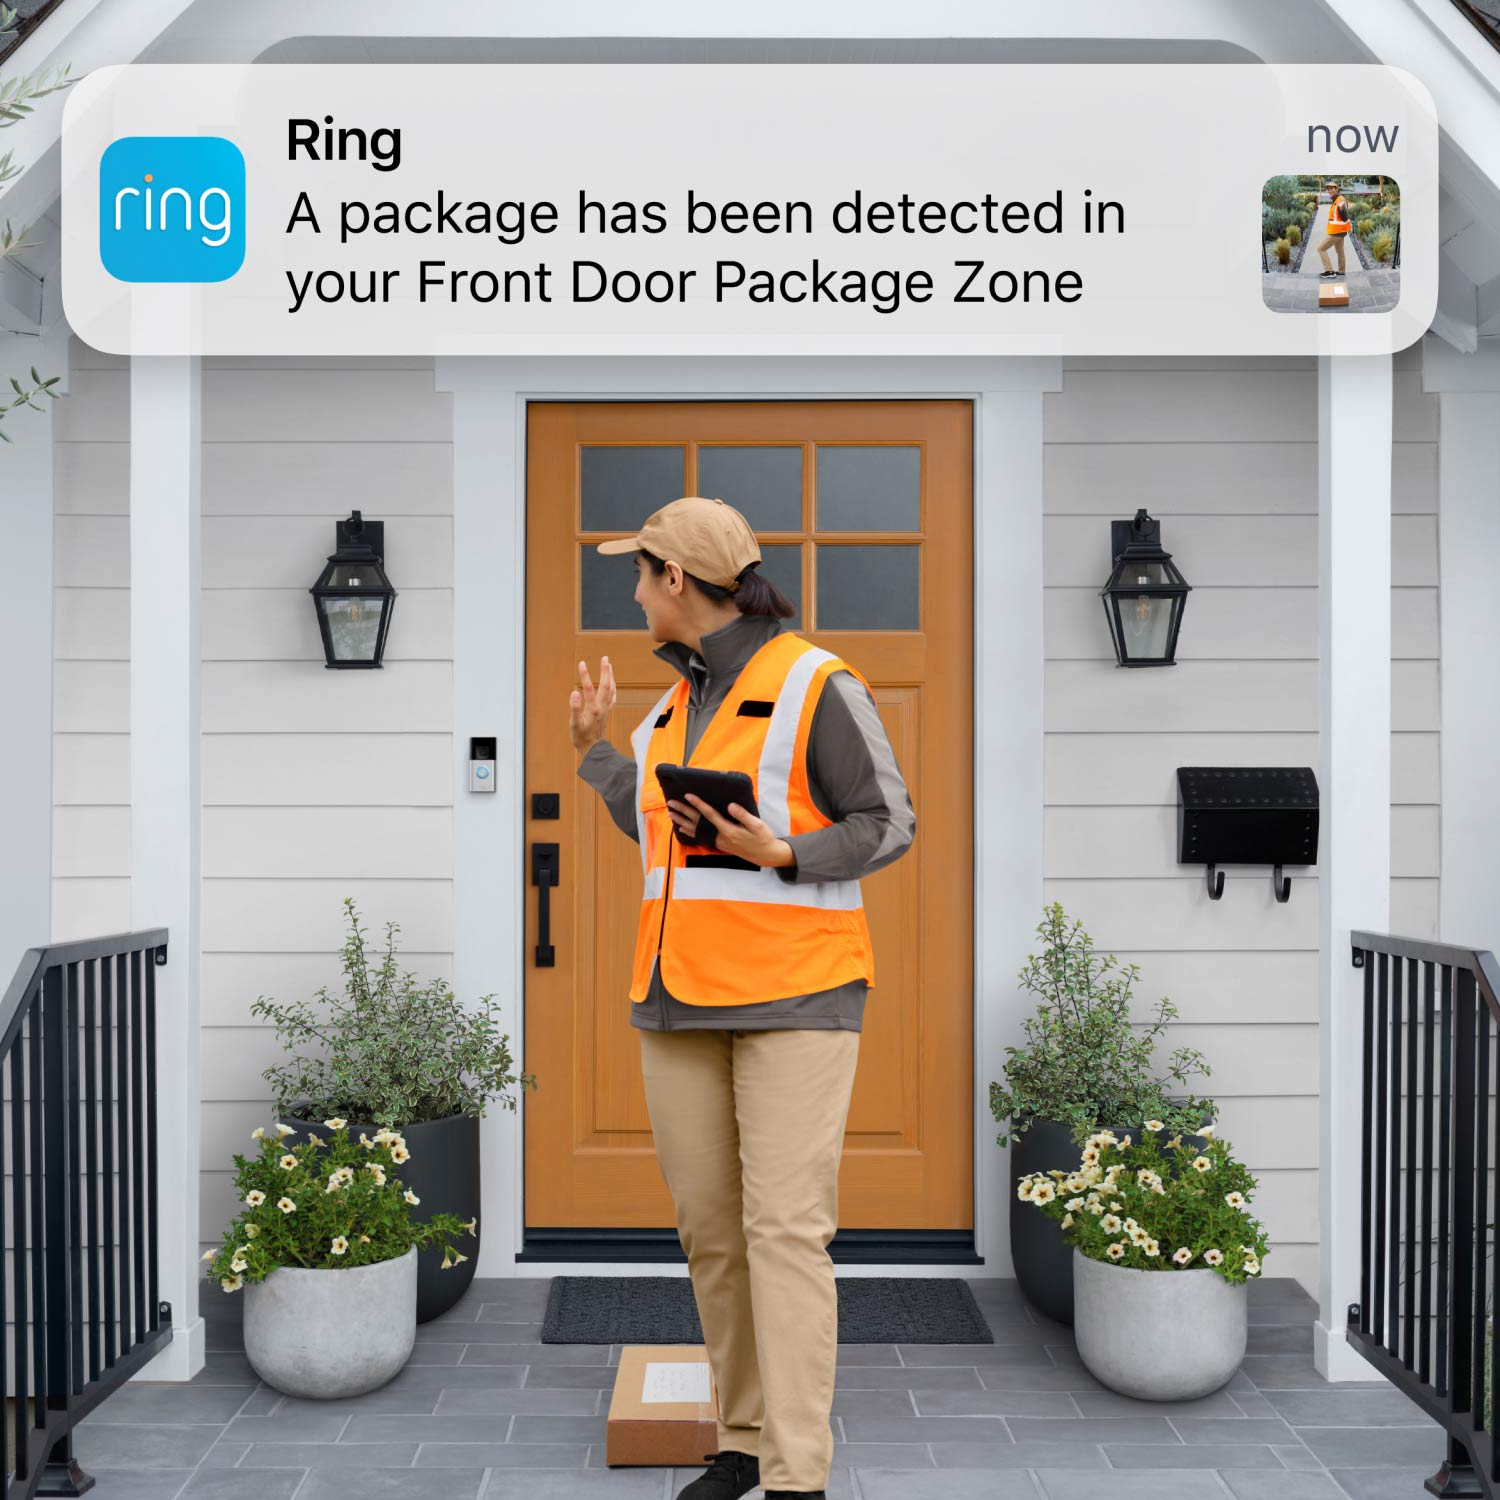 Wired Doorbell Pro (Video Doorbell Pro 2) (Certified Refurbished) - Person delivering a package. Ring push-notification reads: 